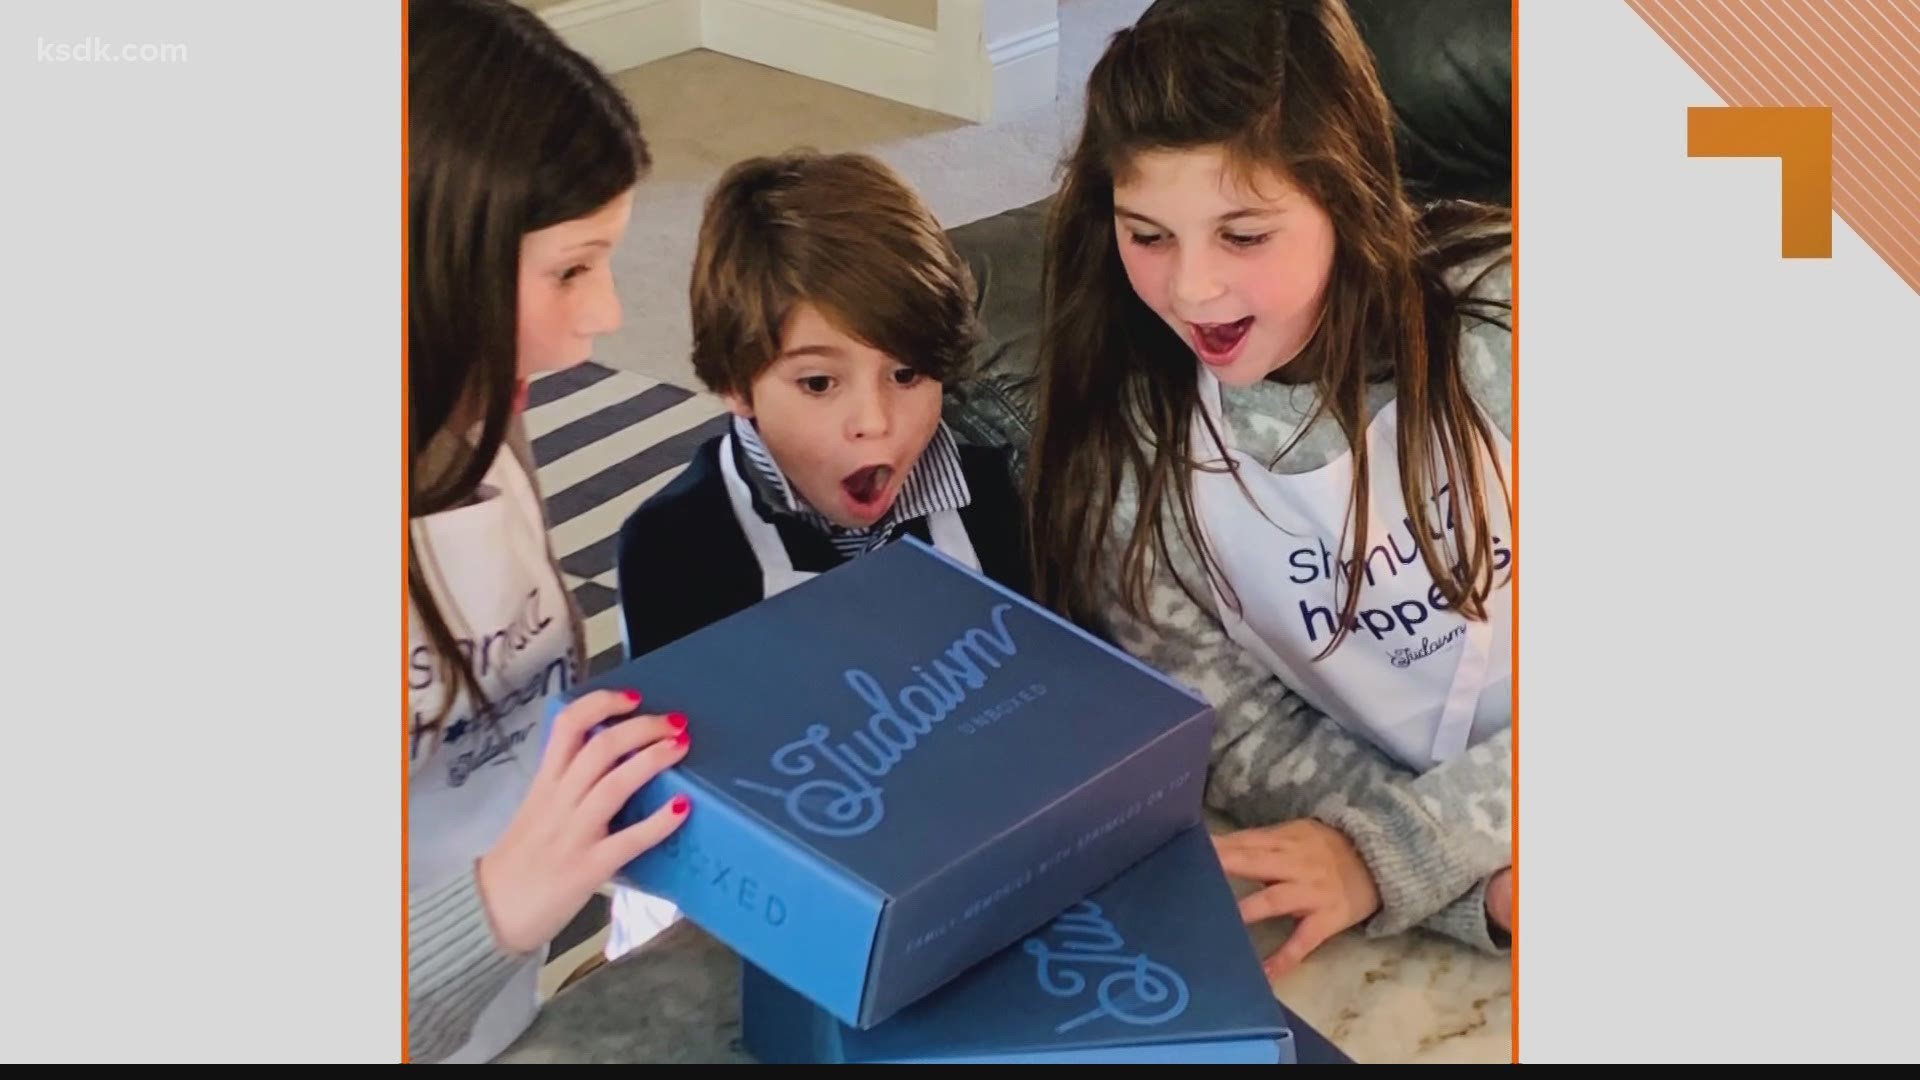 The subscription box service, Judaism Unboxed, is a holiday-themed baking experience that gets delivered 4 times a year.